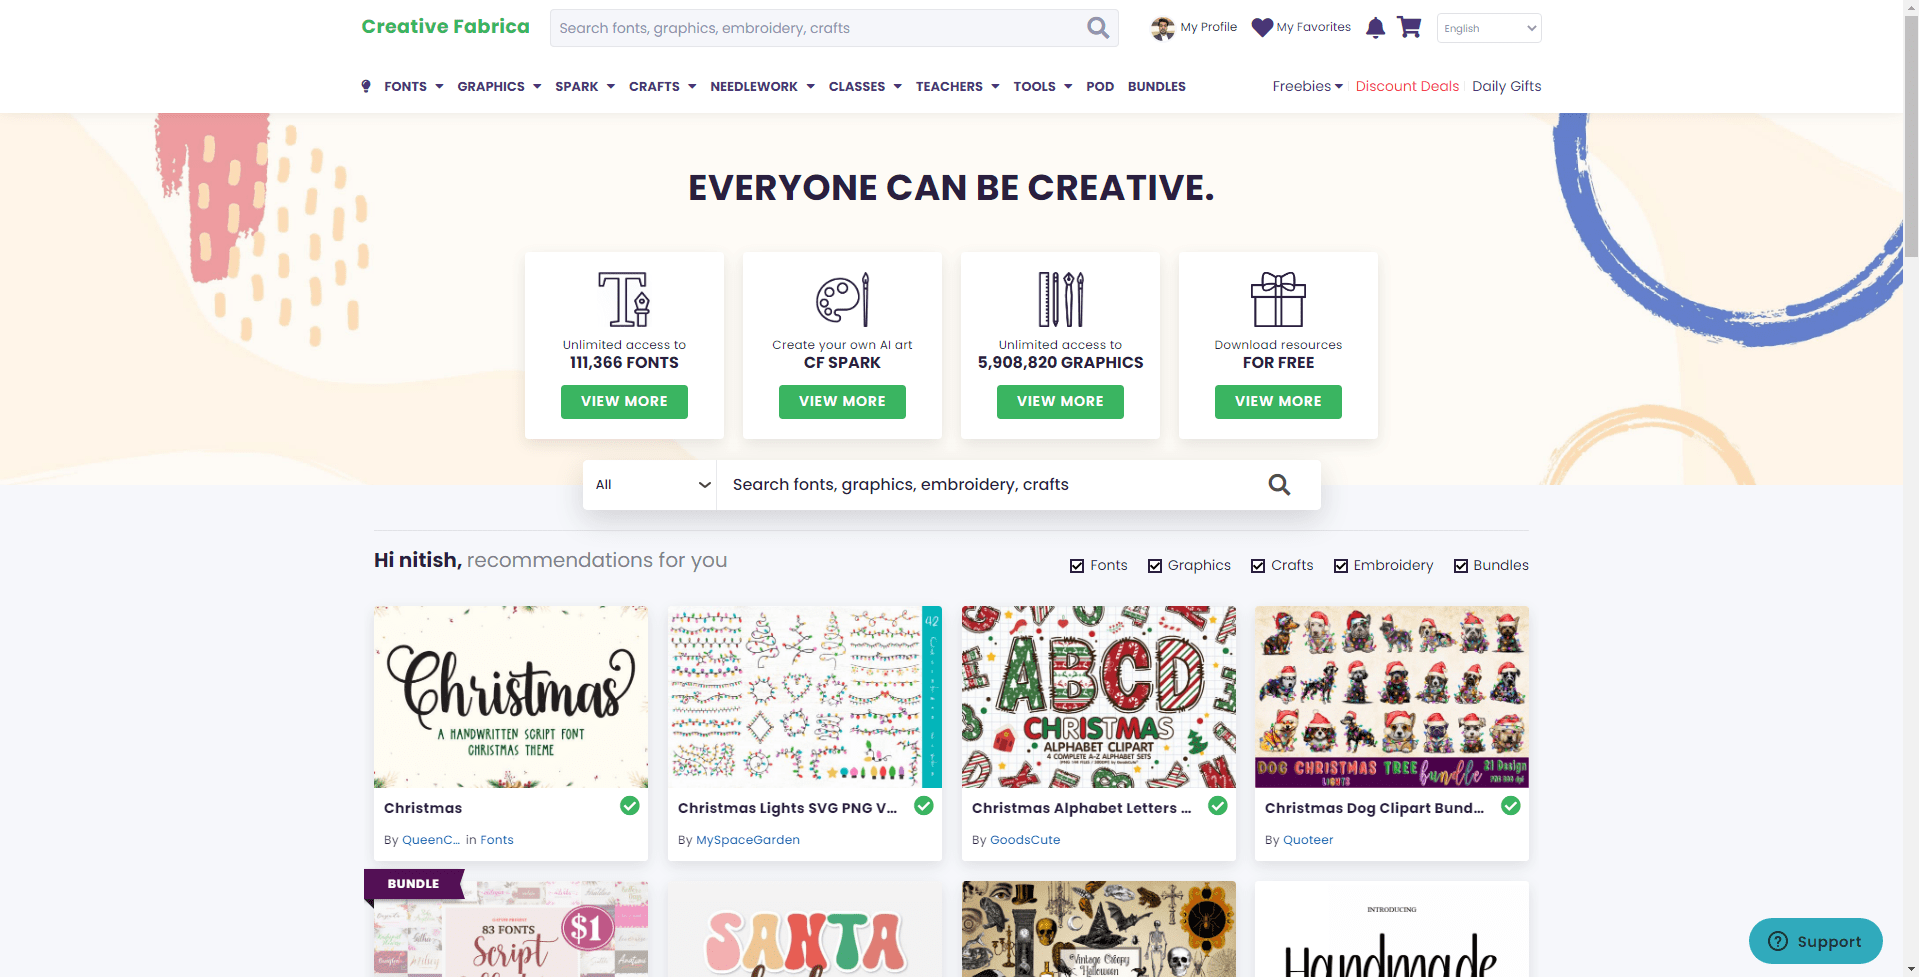 creative fabrica homepage upload fonts to canva